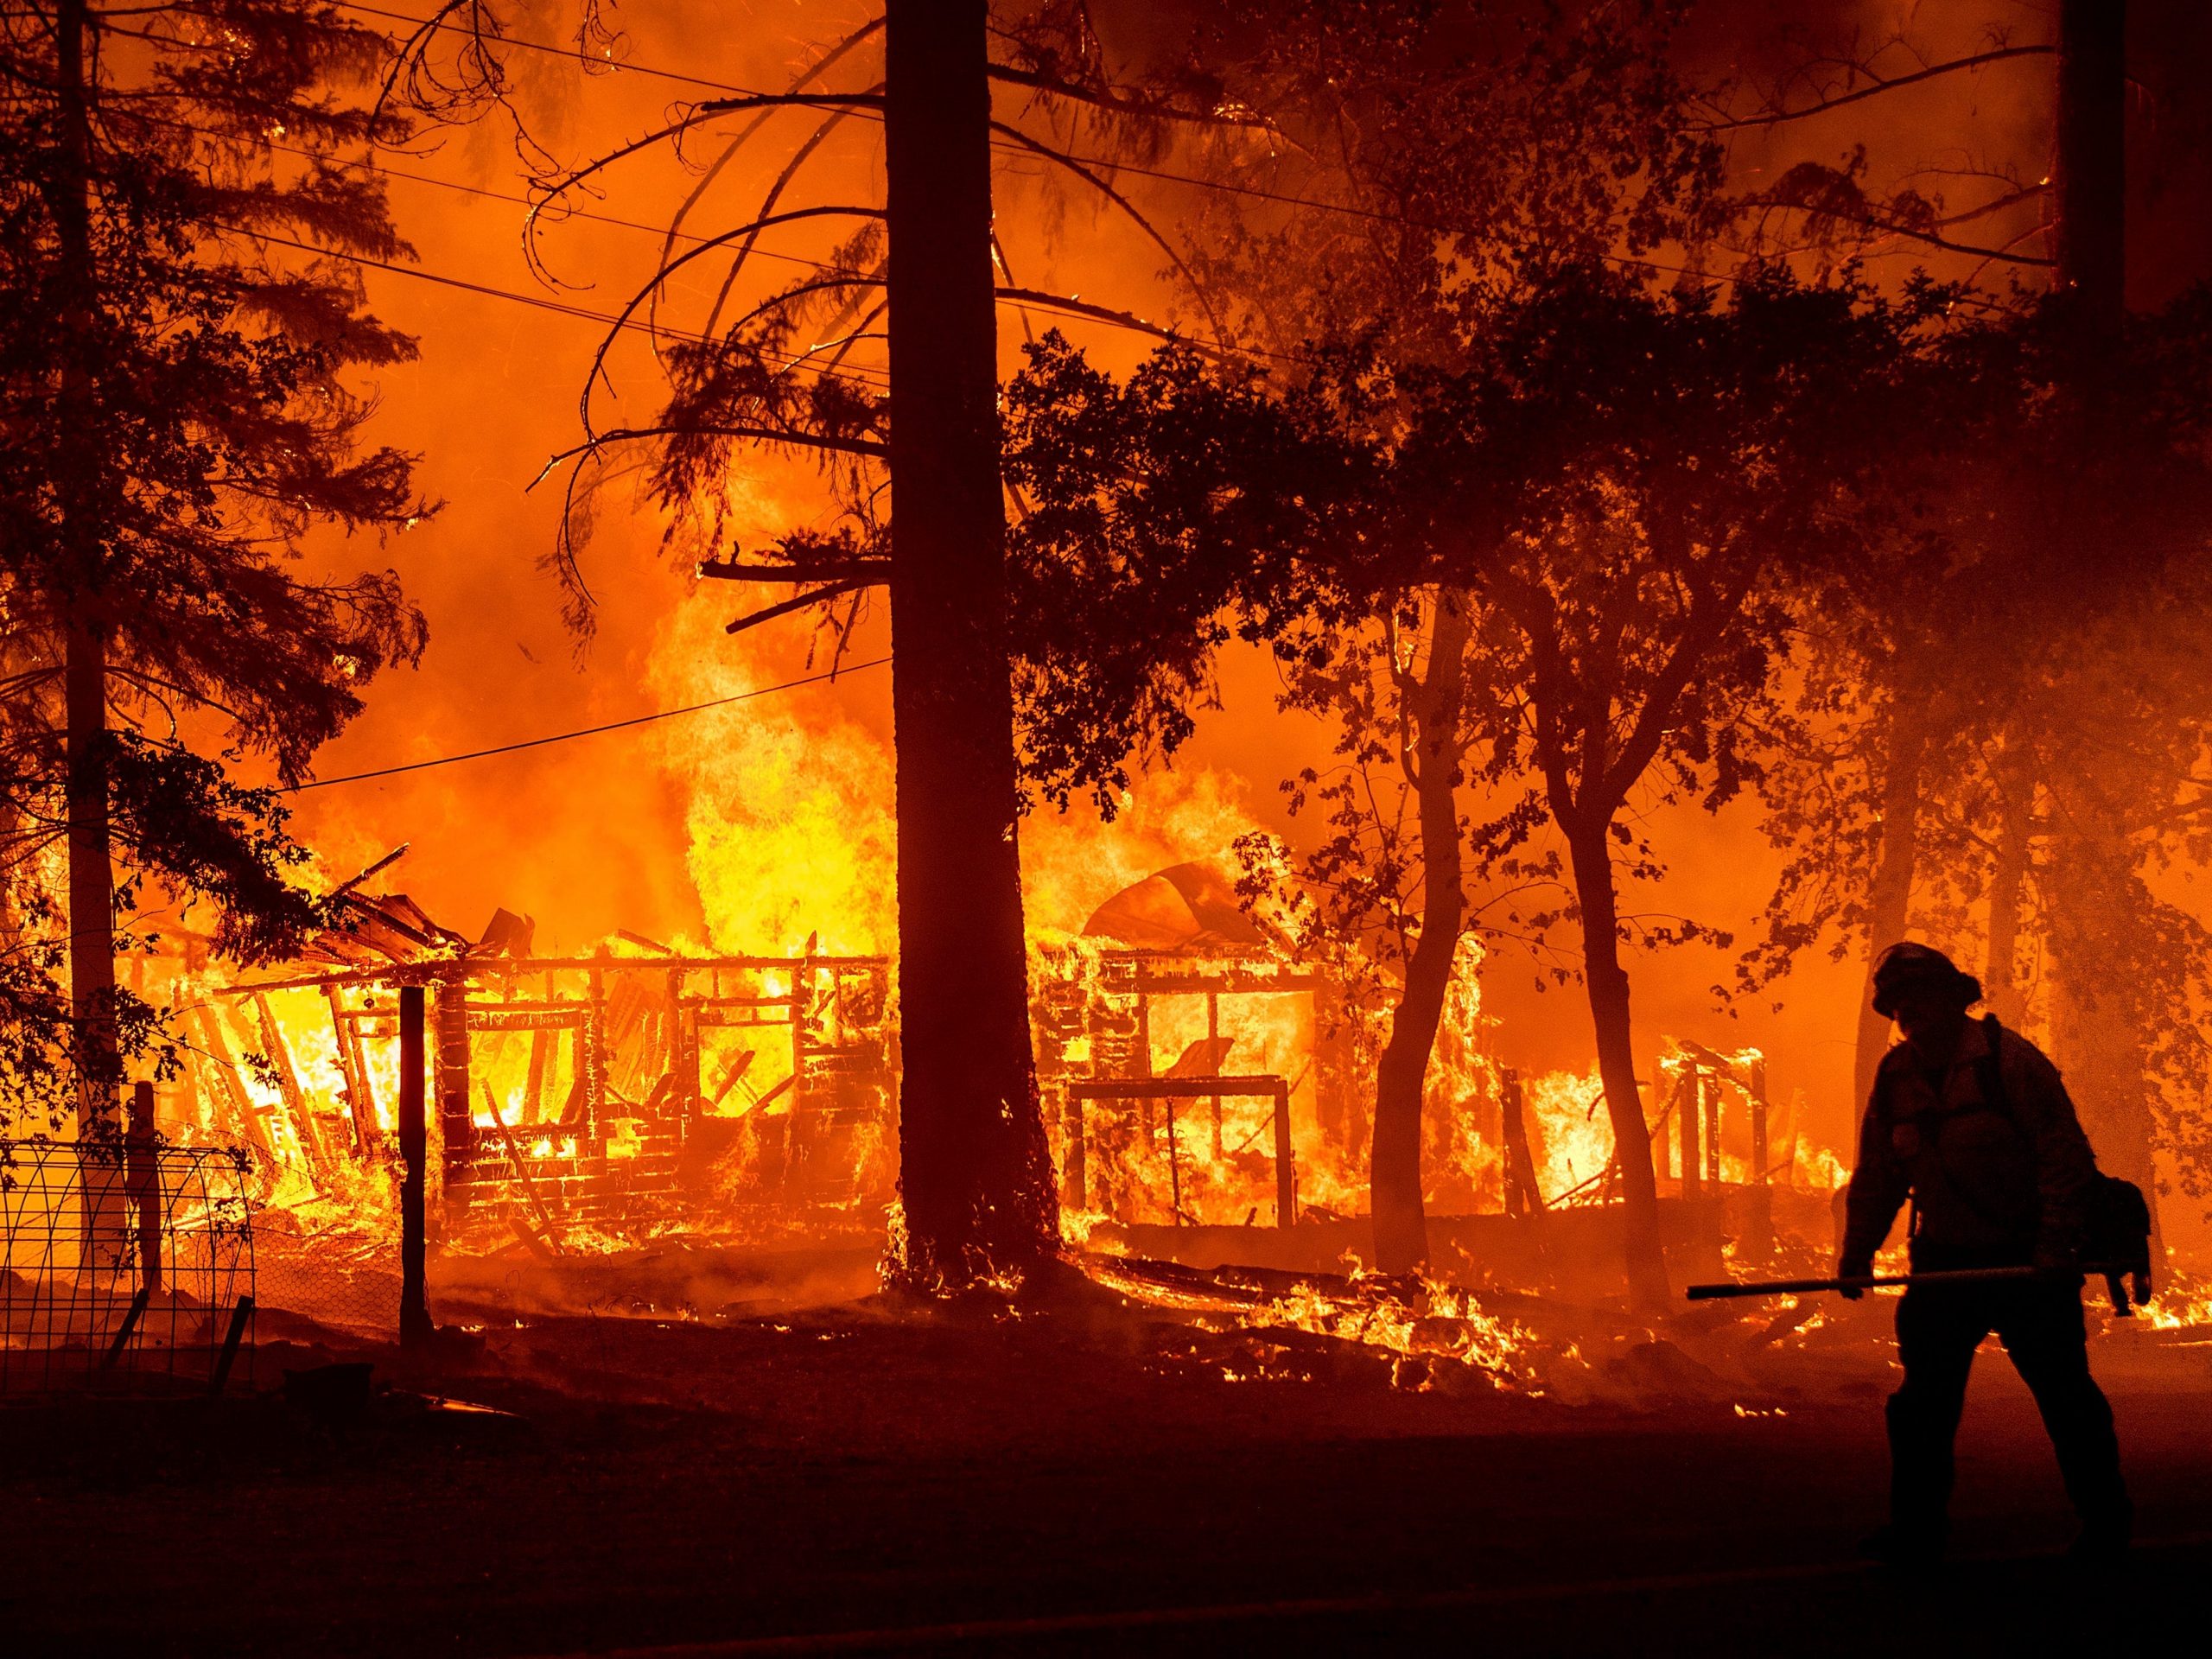 The sillouhette of a firefighter stands in front of a burning home.